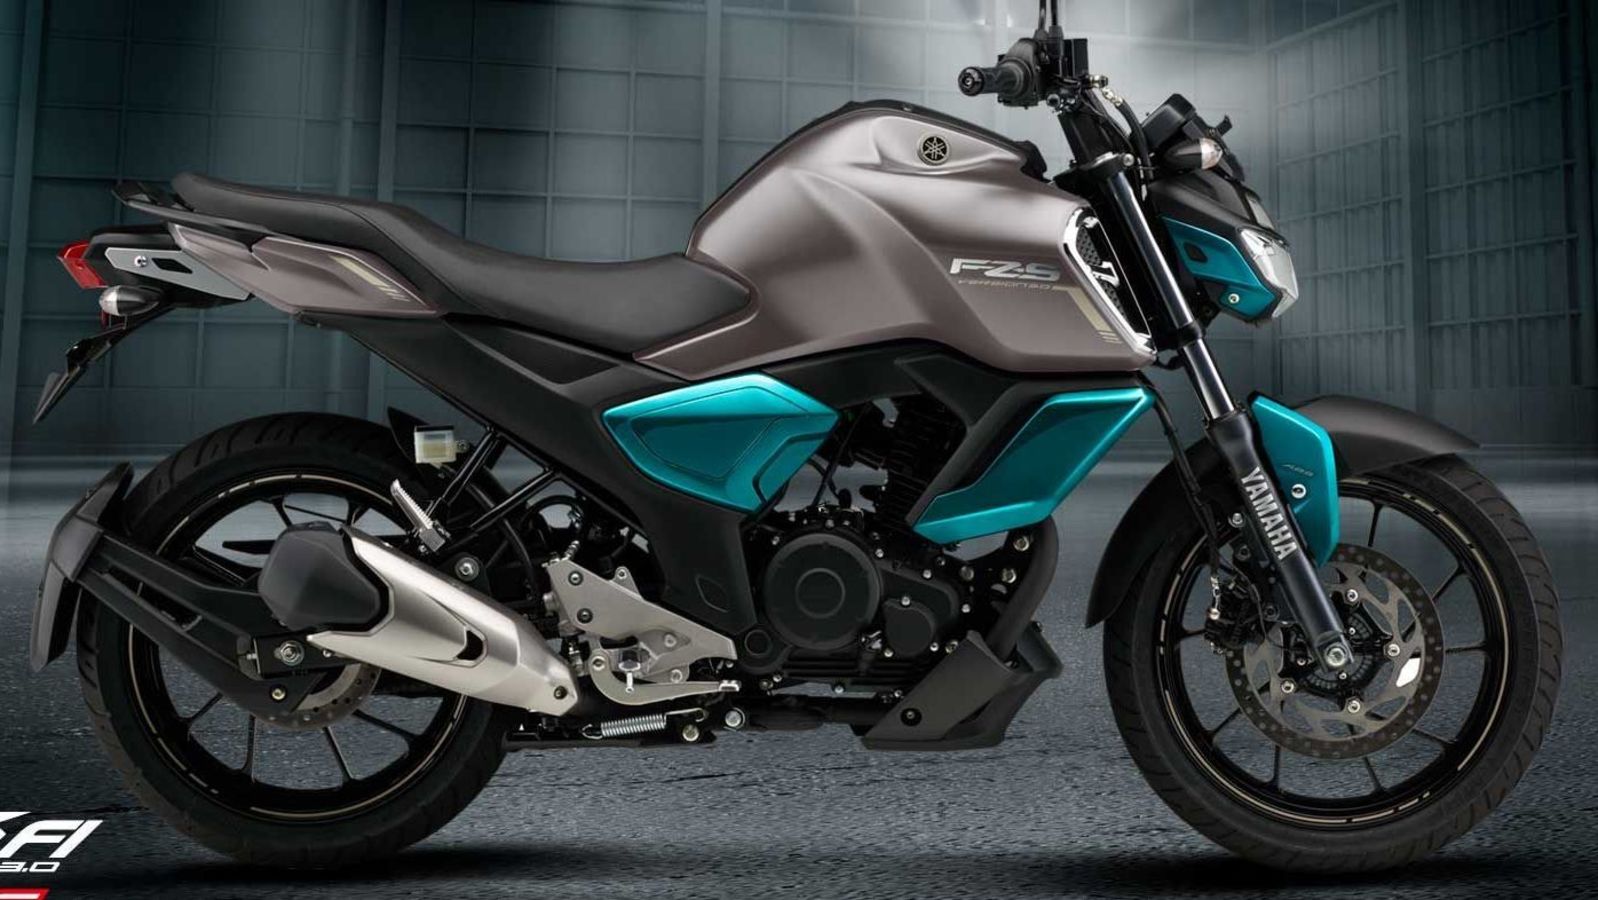 Yamaha FZ 25 and FZS 25 prices reduced by up to ₹19,300 | HT Auto